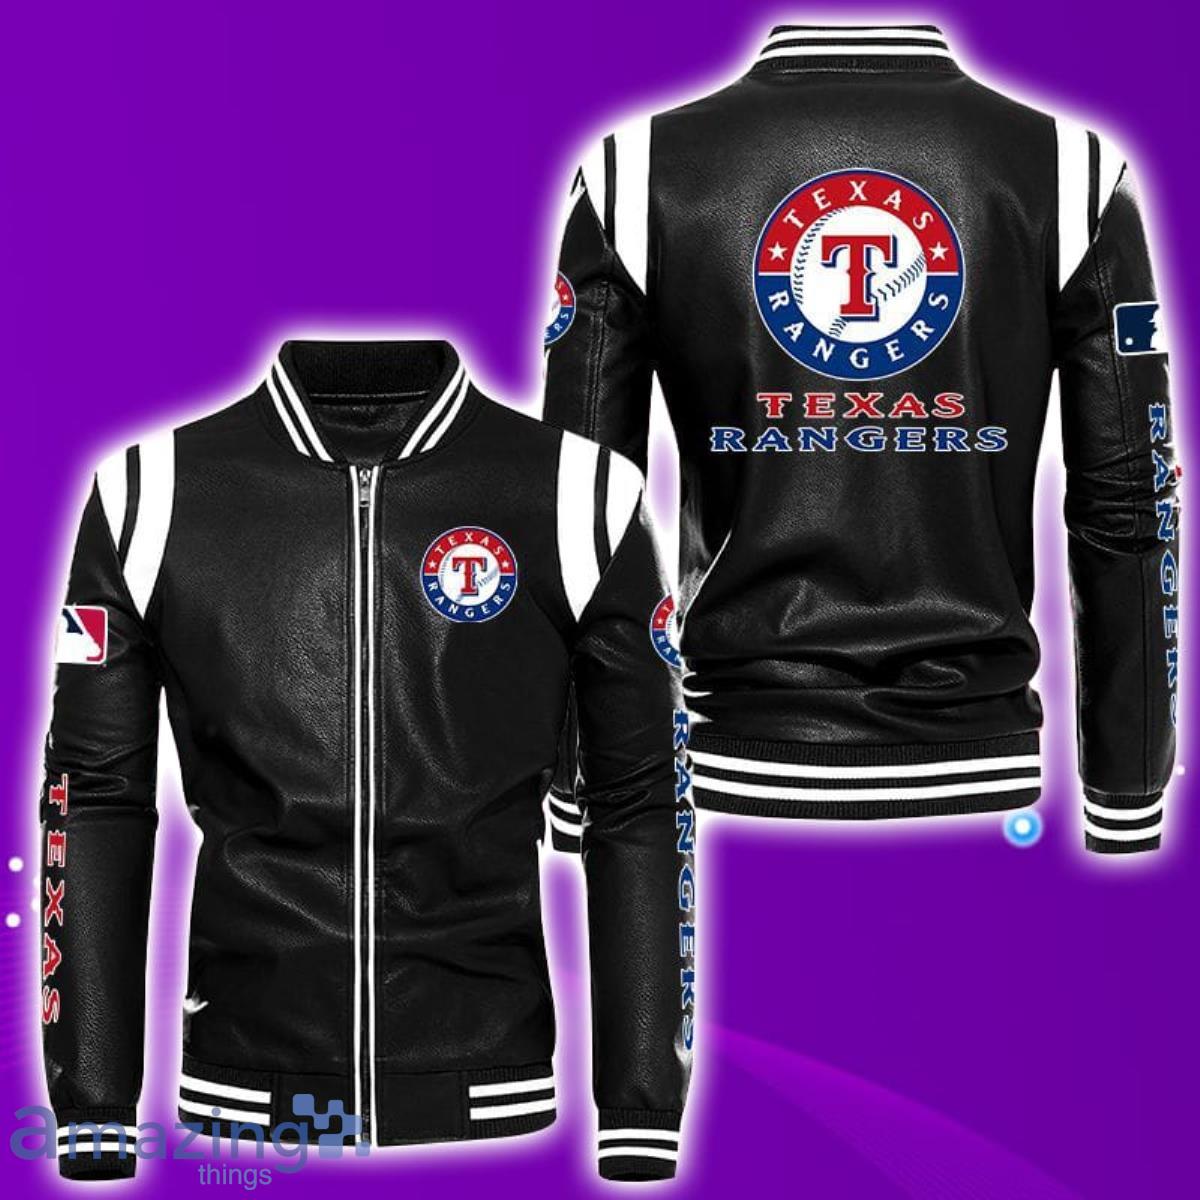 Texas Rangers Leather Bomber Jacket Best Gift For Men And Women Fans